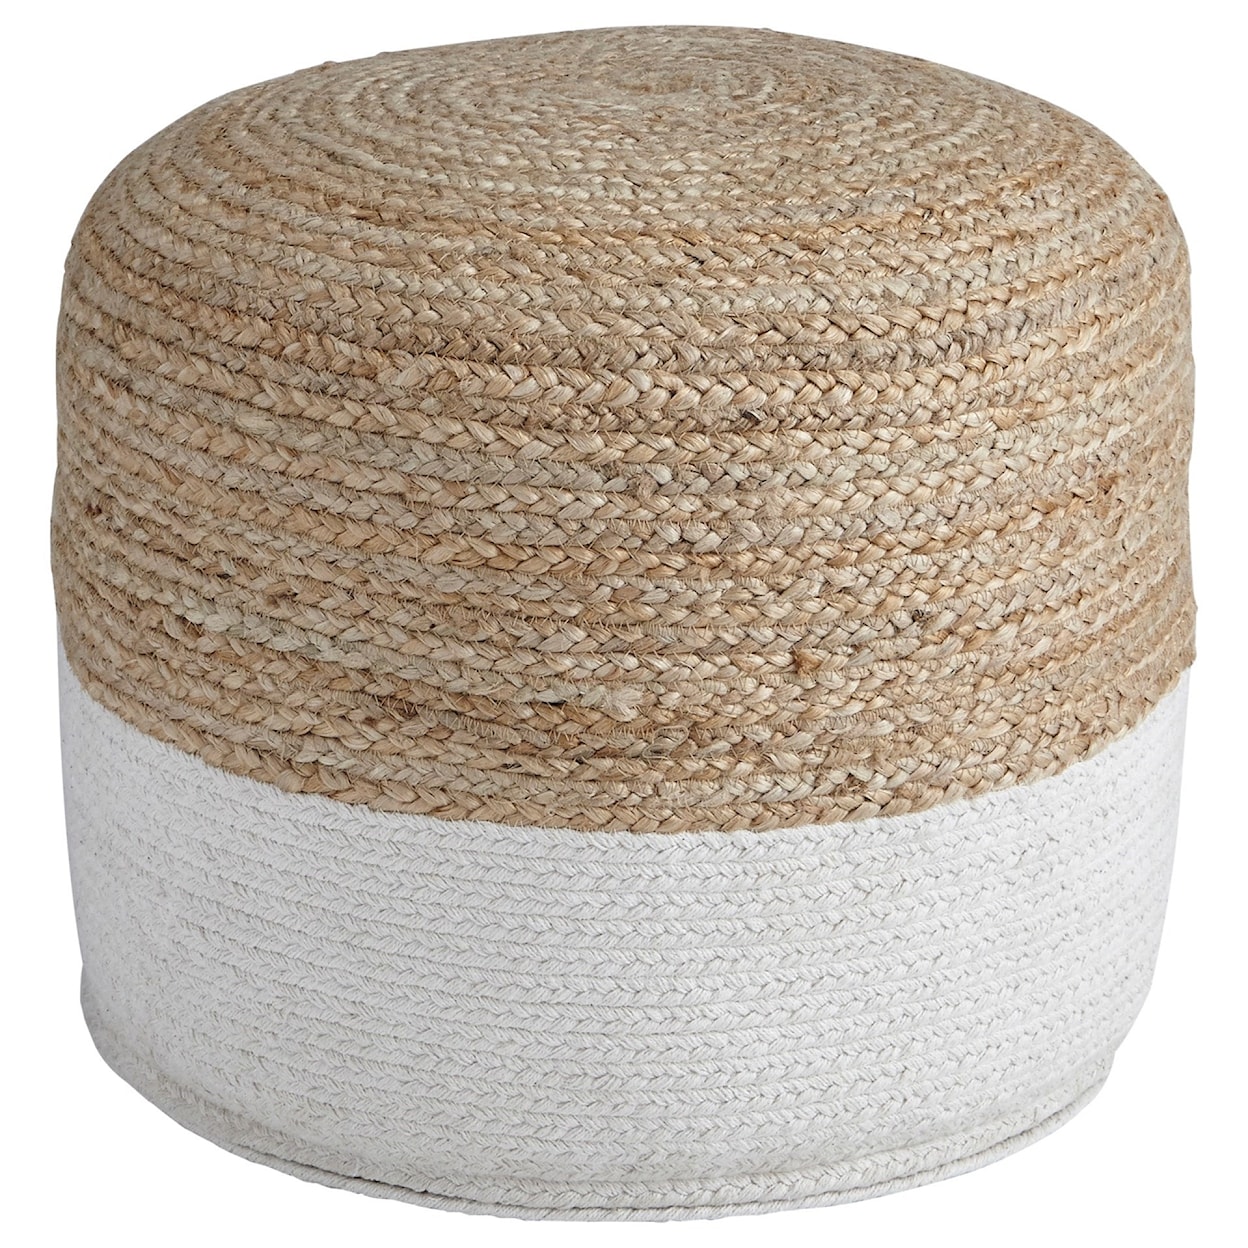 Signature Design by Ashley Poufs Sweed Valley - Natural/White Pouf